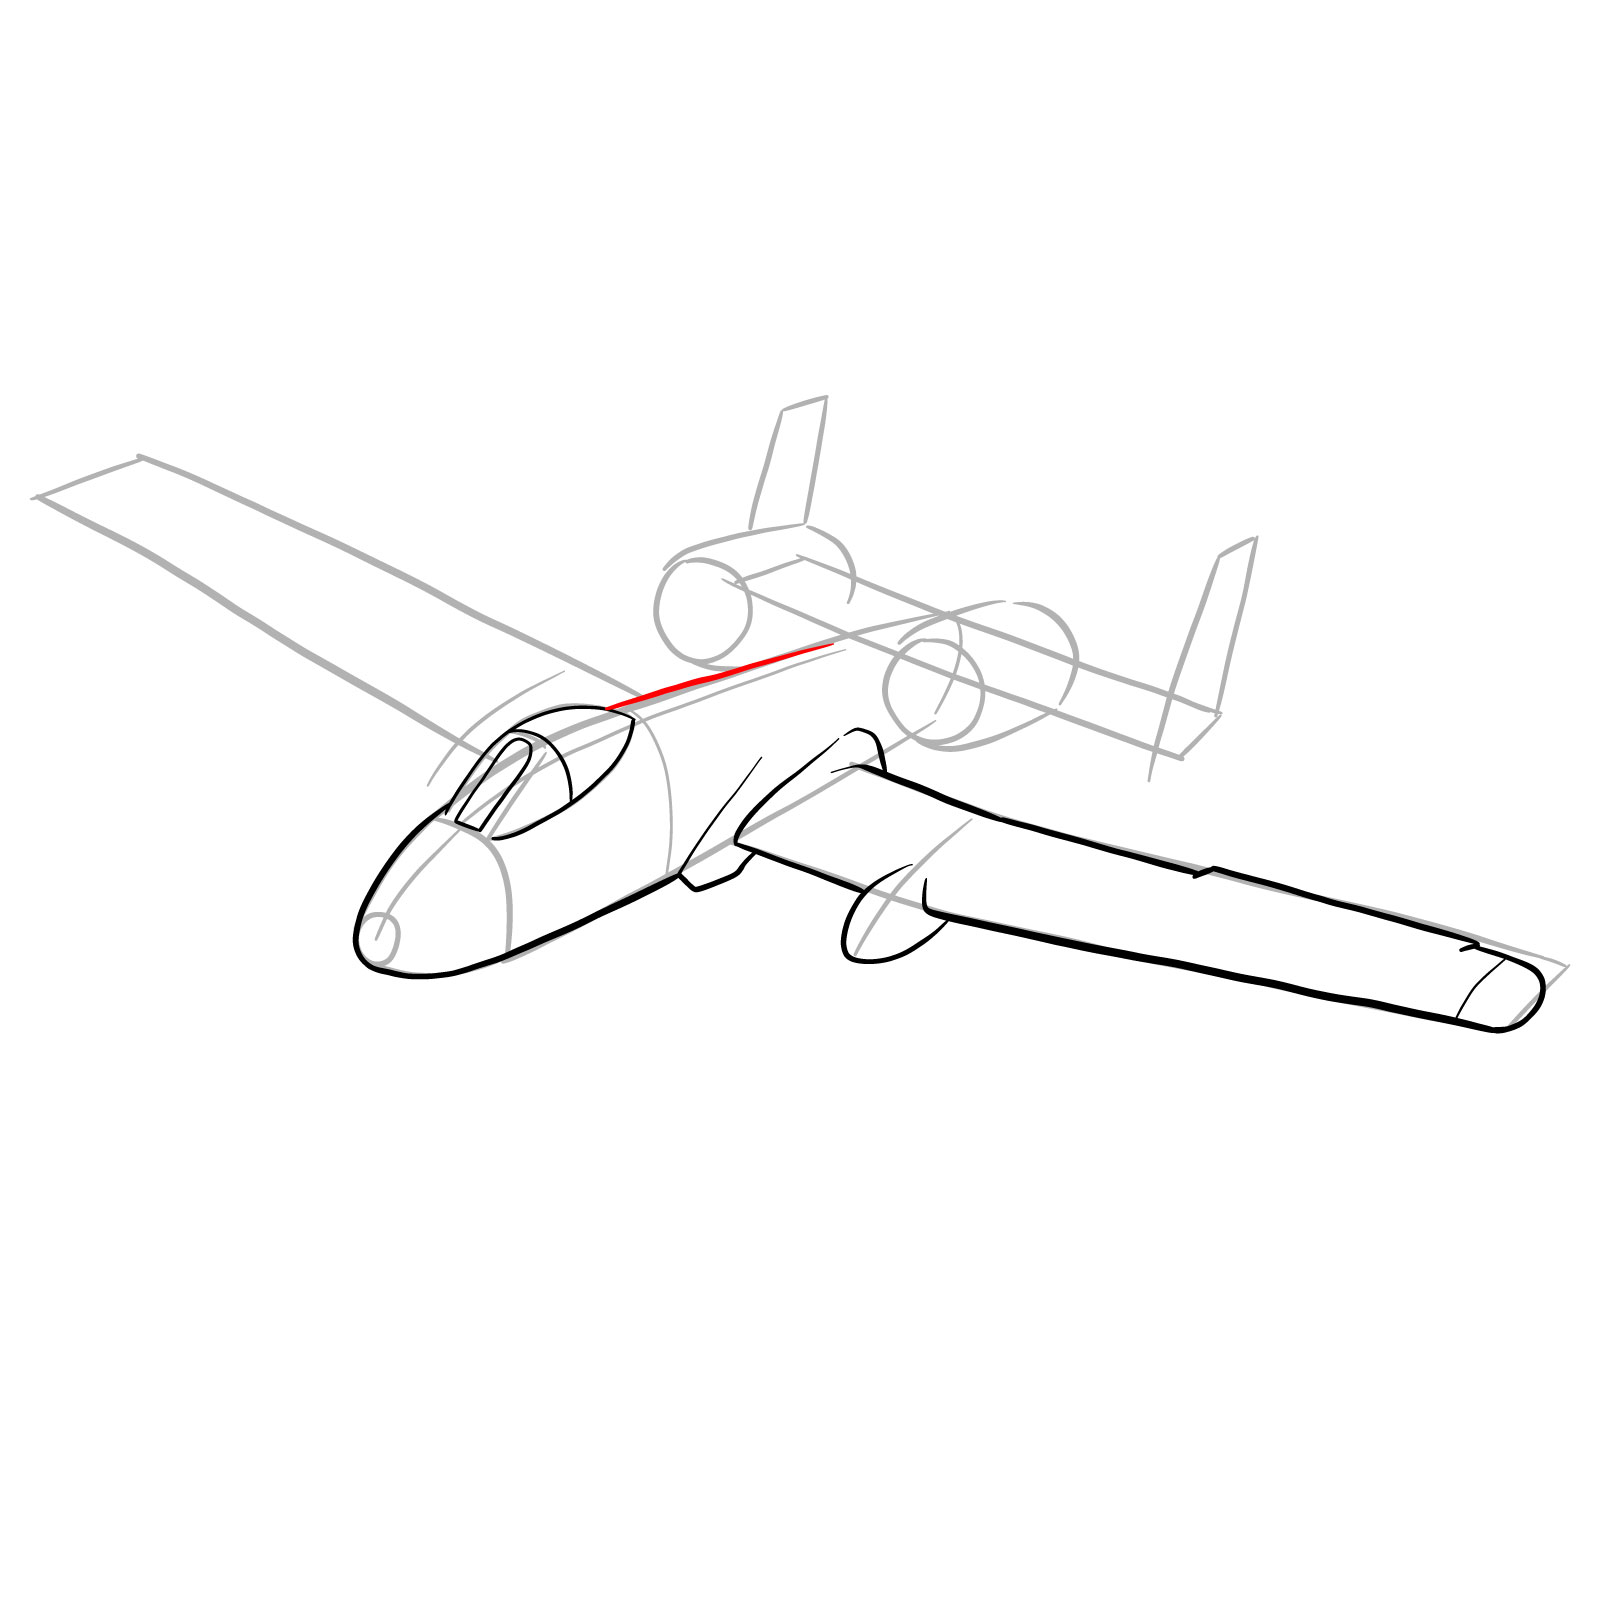 How to draw A-10 Thunderbolt II - step 12